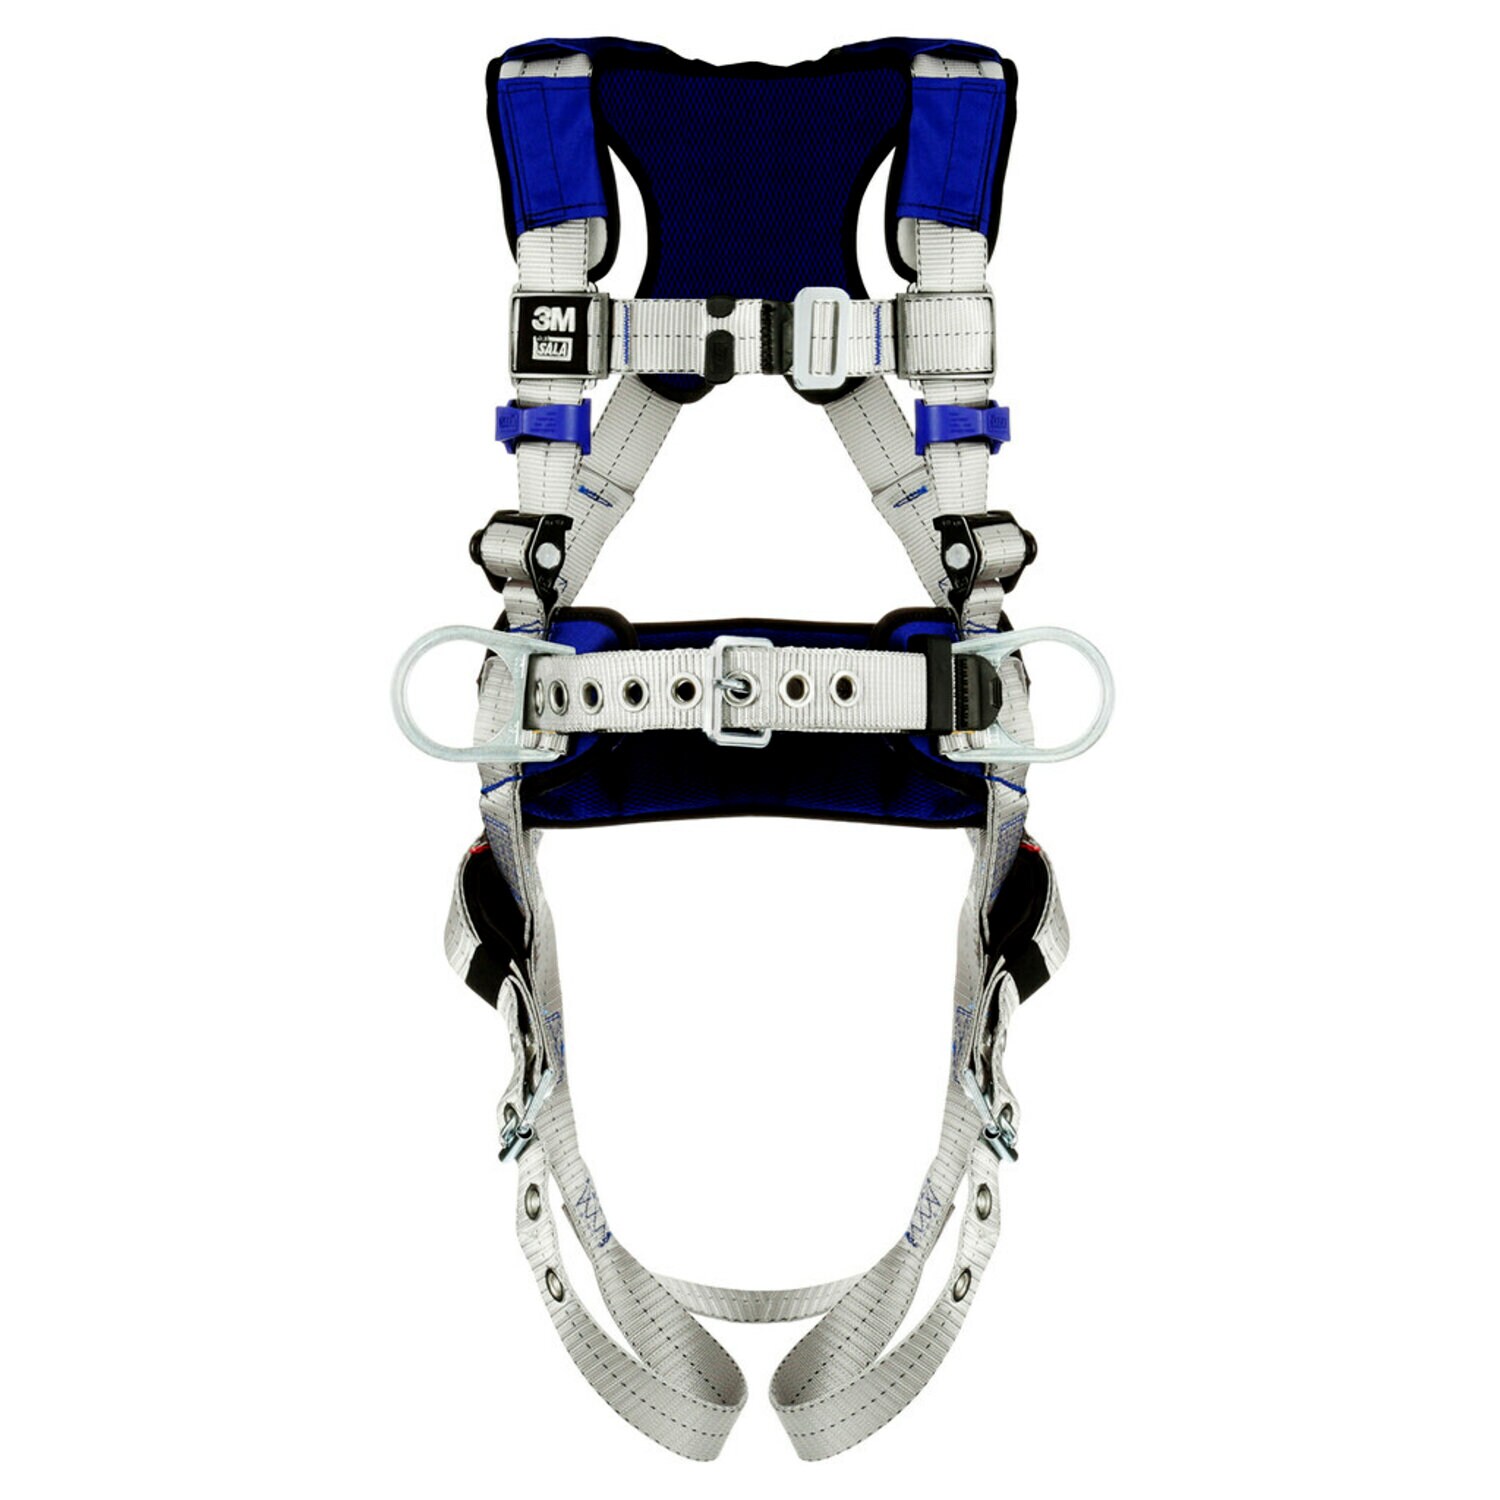 7012817545 - 3M DBI-SALA ExoFit X100 Comfort Construction Positioning Safety Harness 1401070, Small